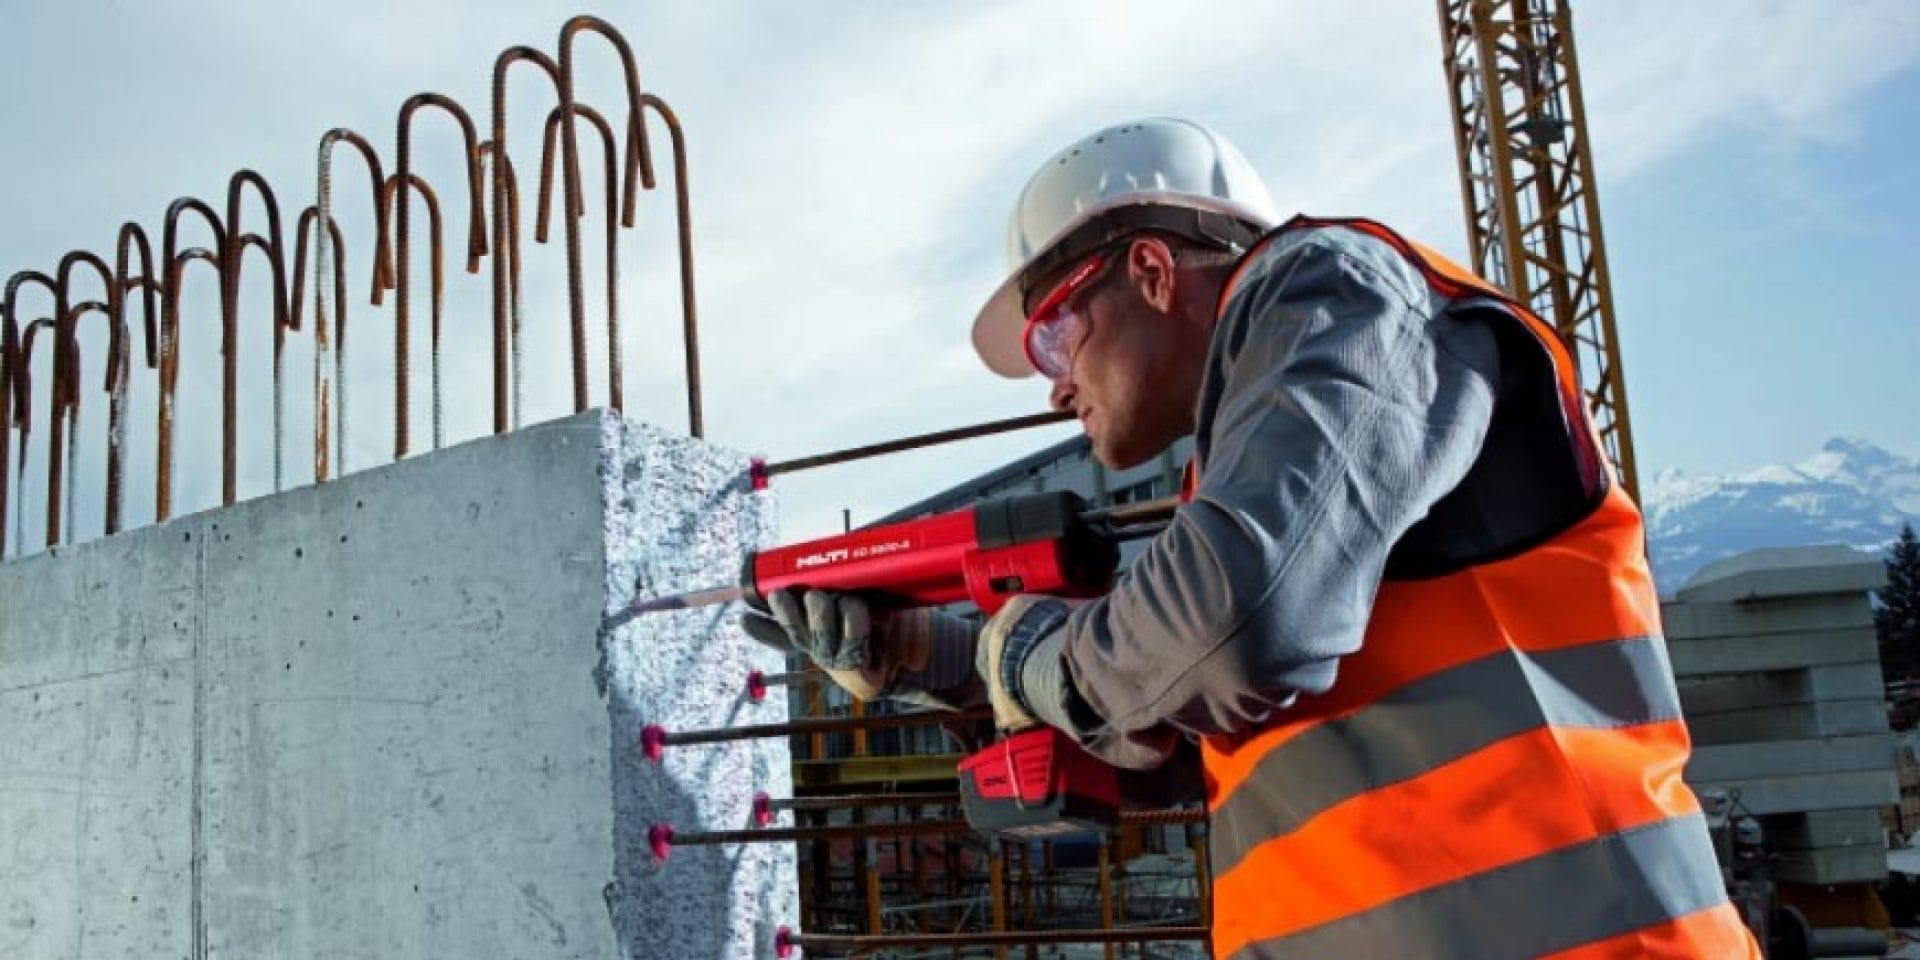 Construction worker reinforcing rebar vertically on a concrete wall